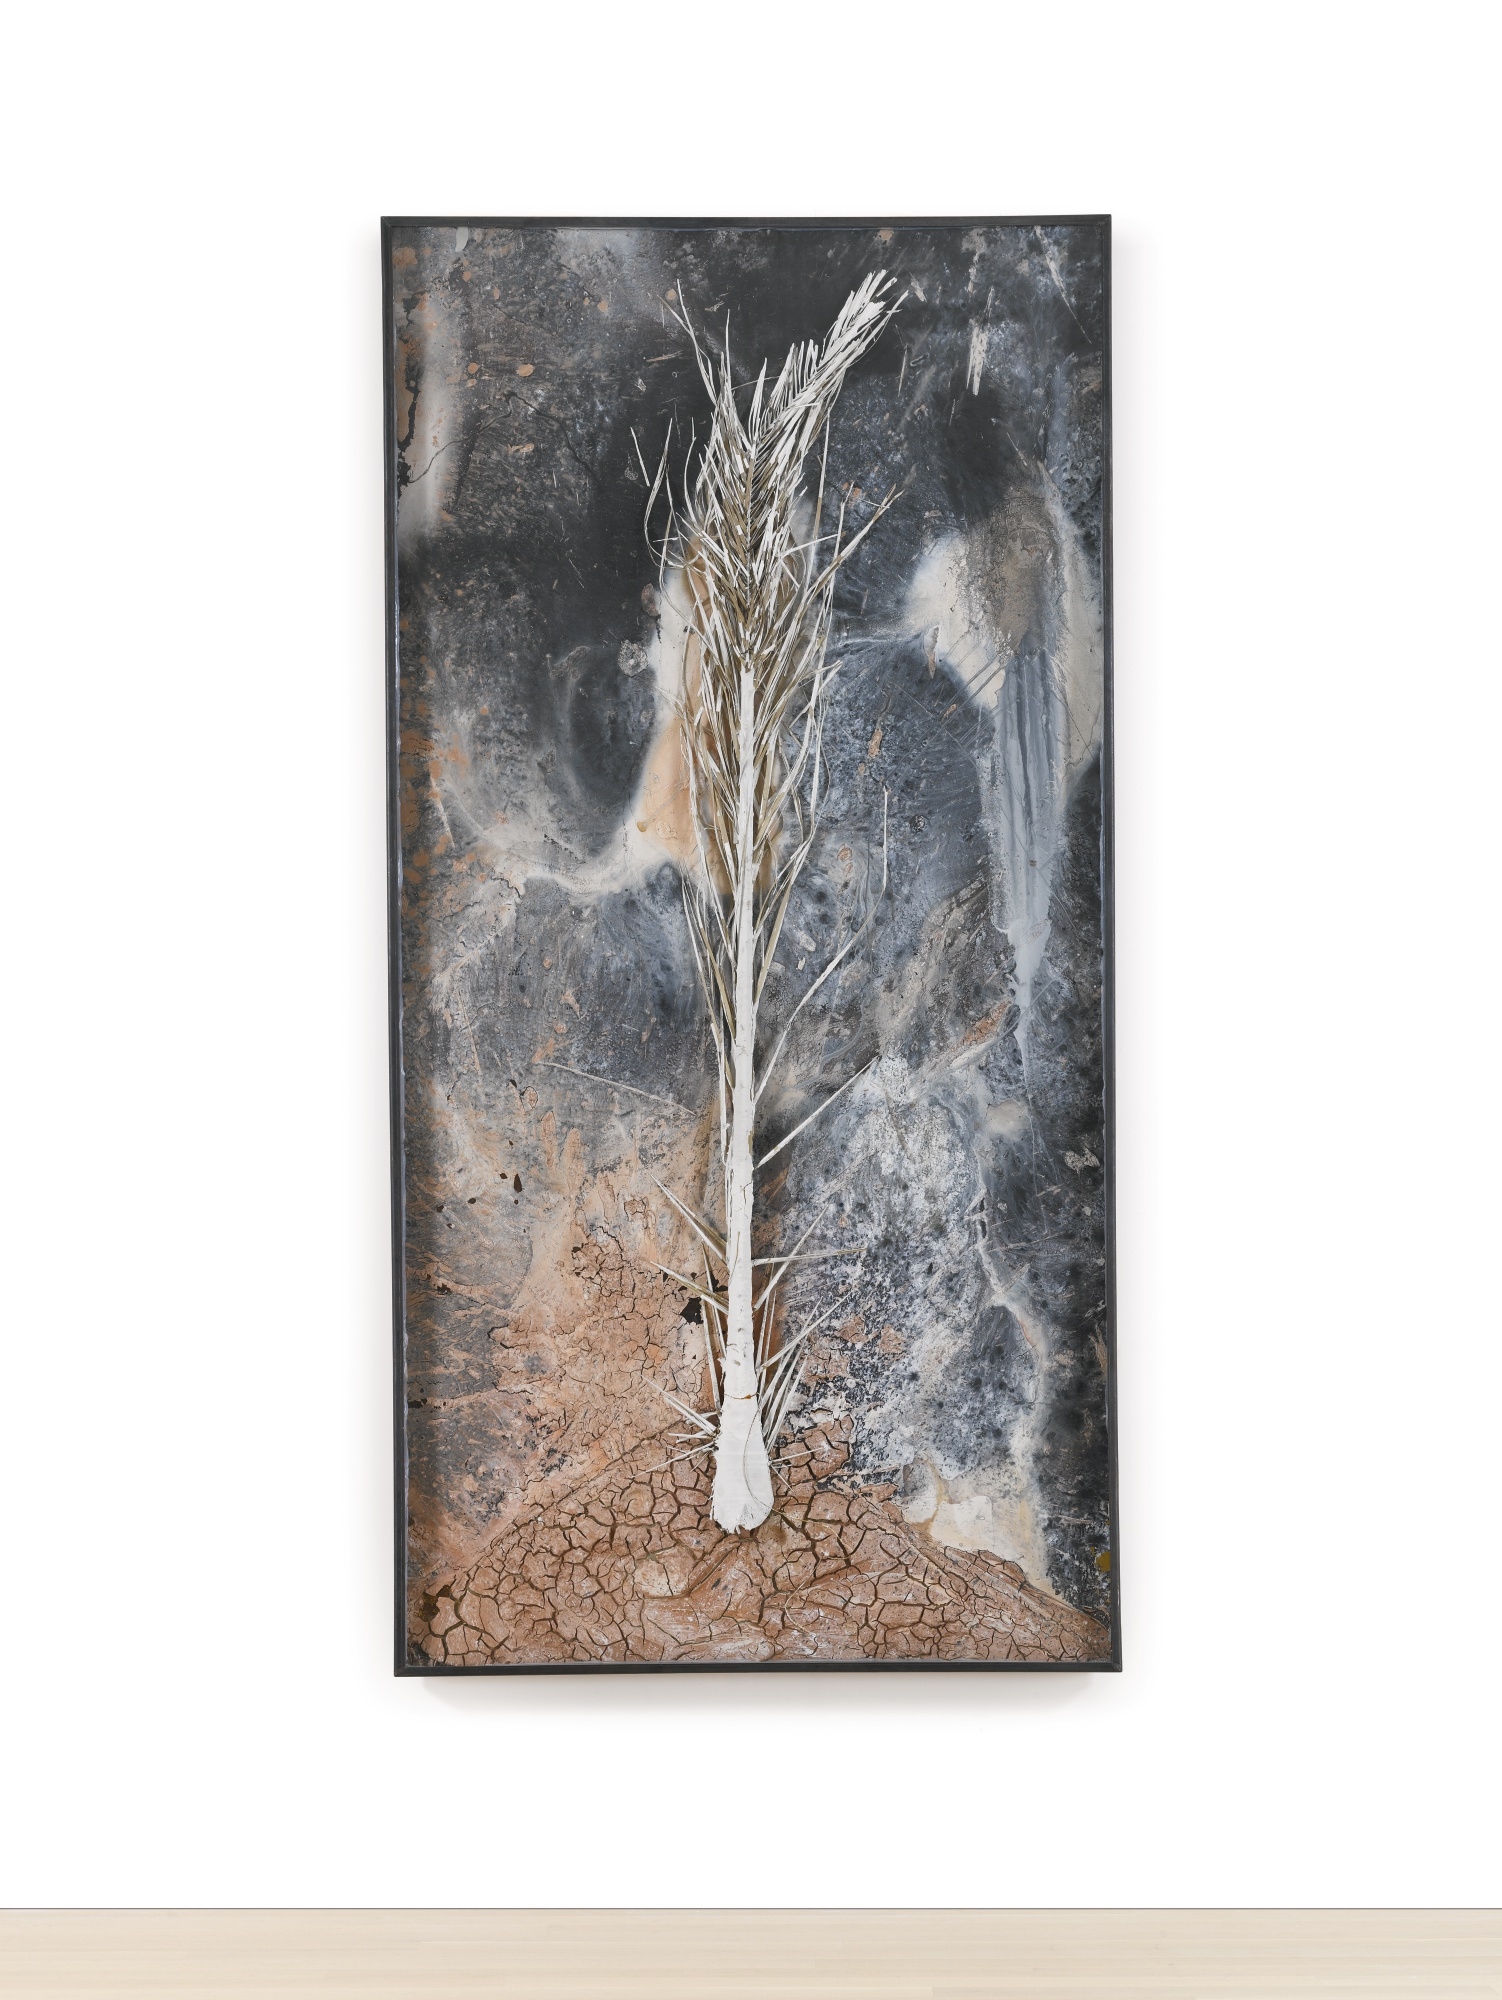 The Palm by Anselm Kiefer, 2006